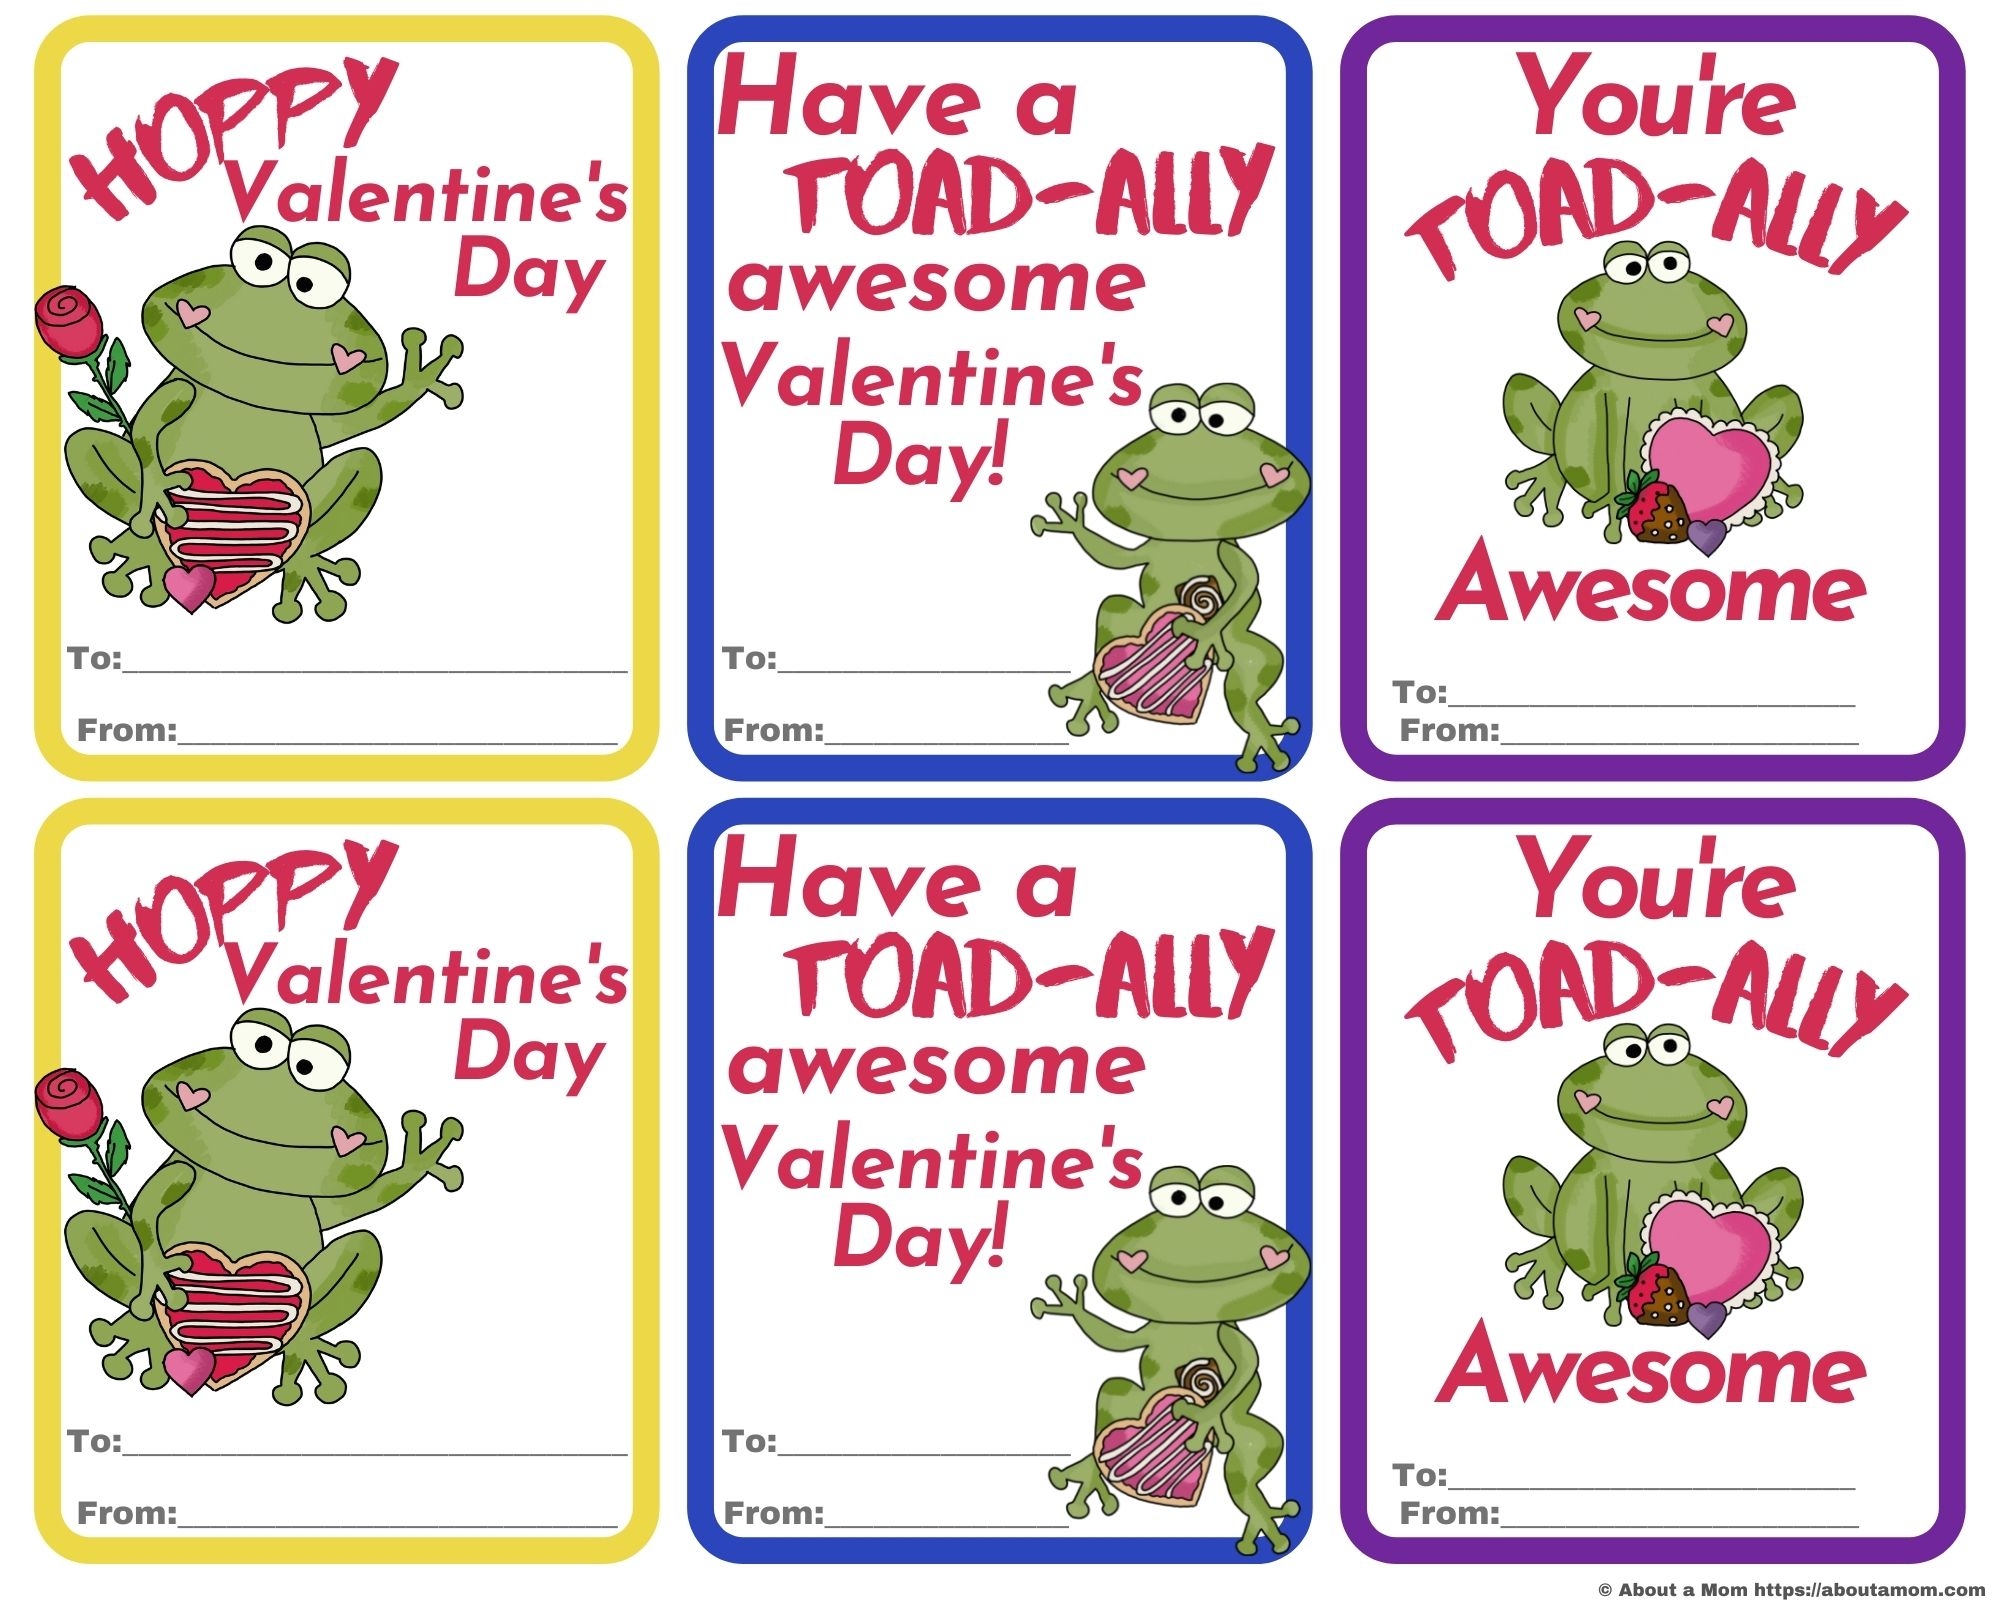 50 Free Printable Valentine s Day Cards - Free Printable Childrens Valentines Day Cards